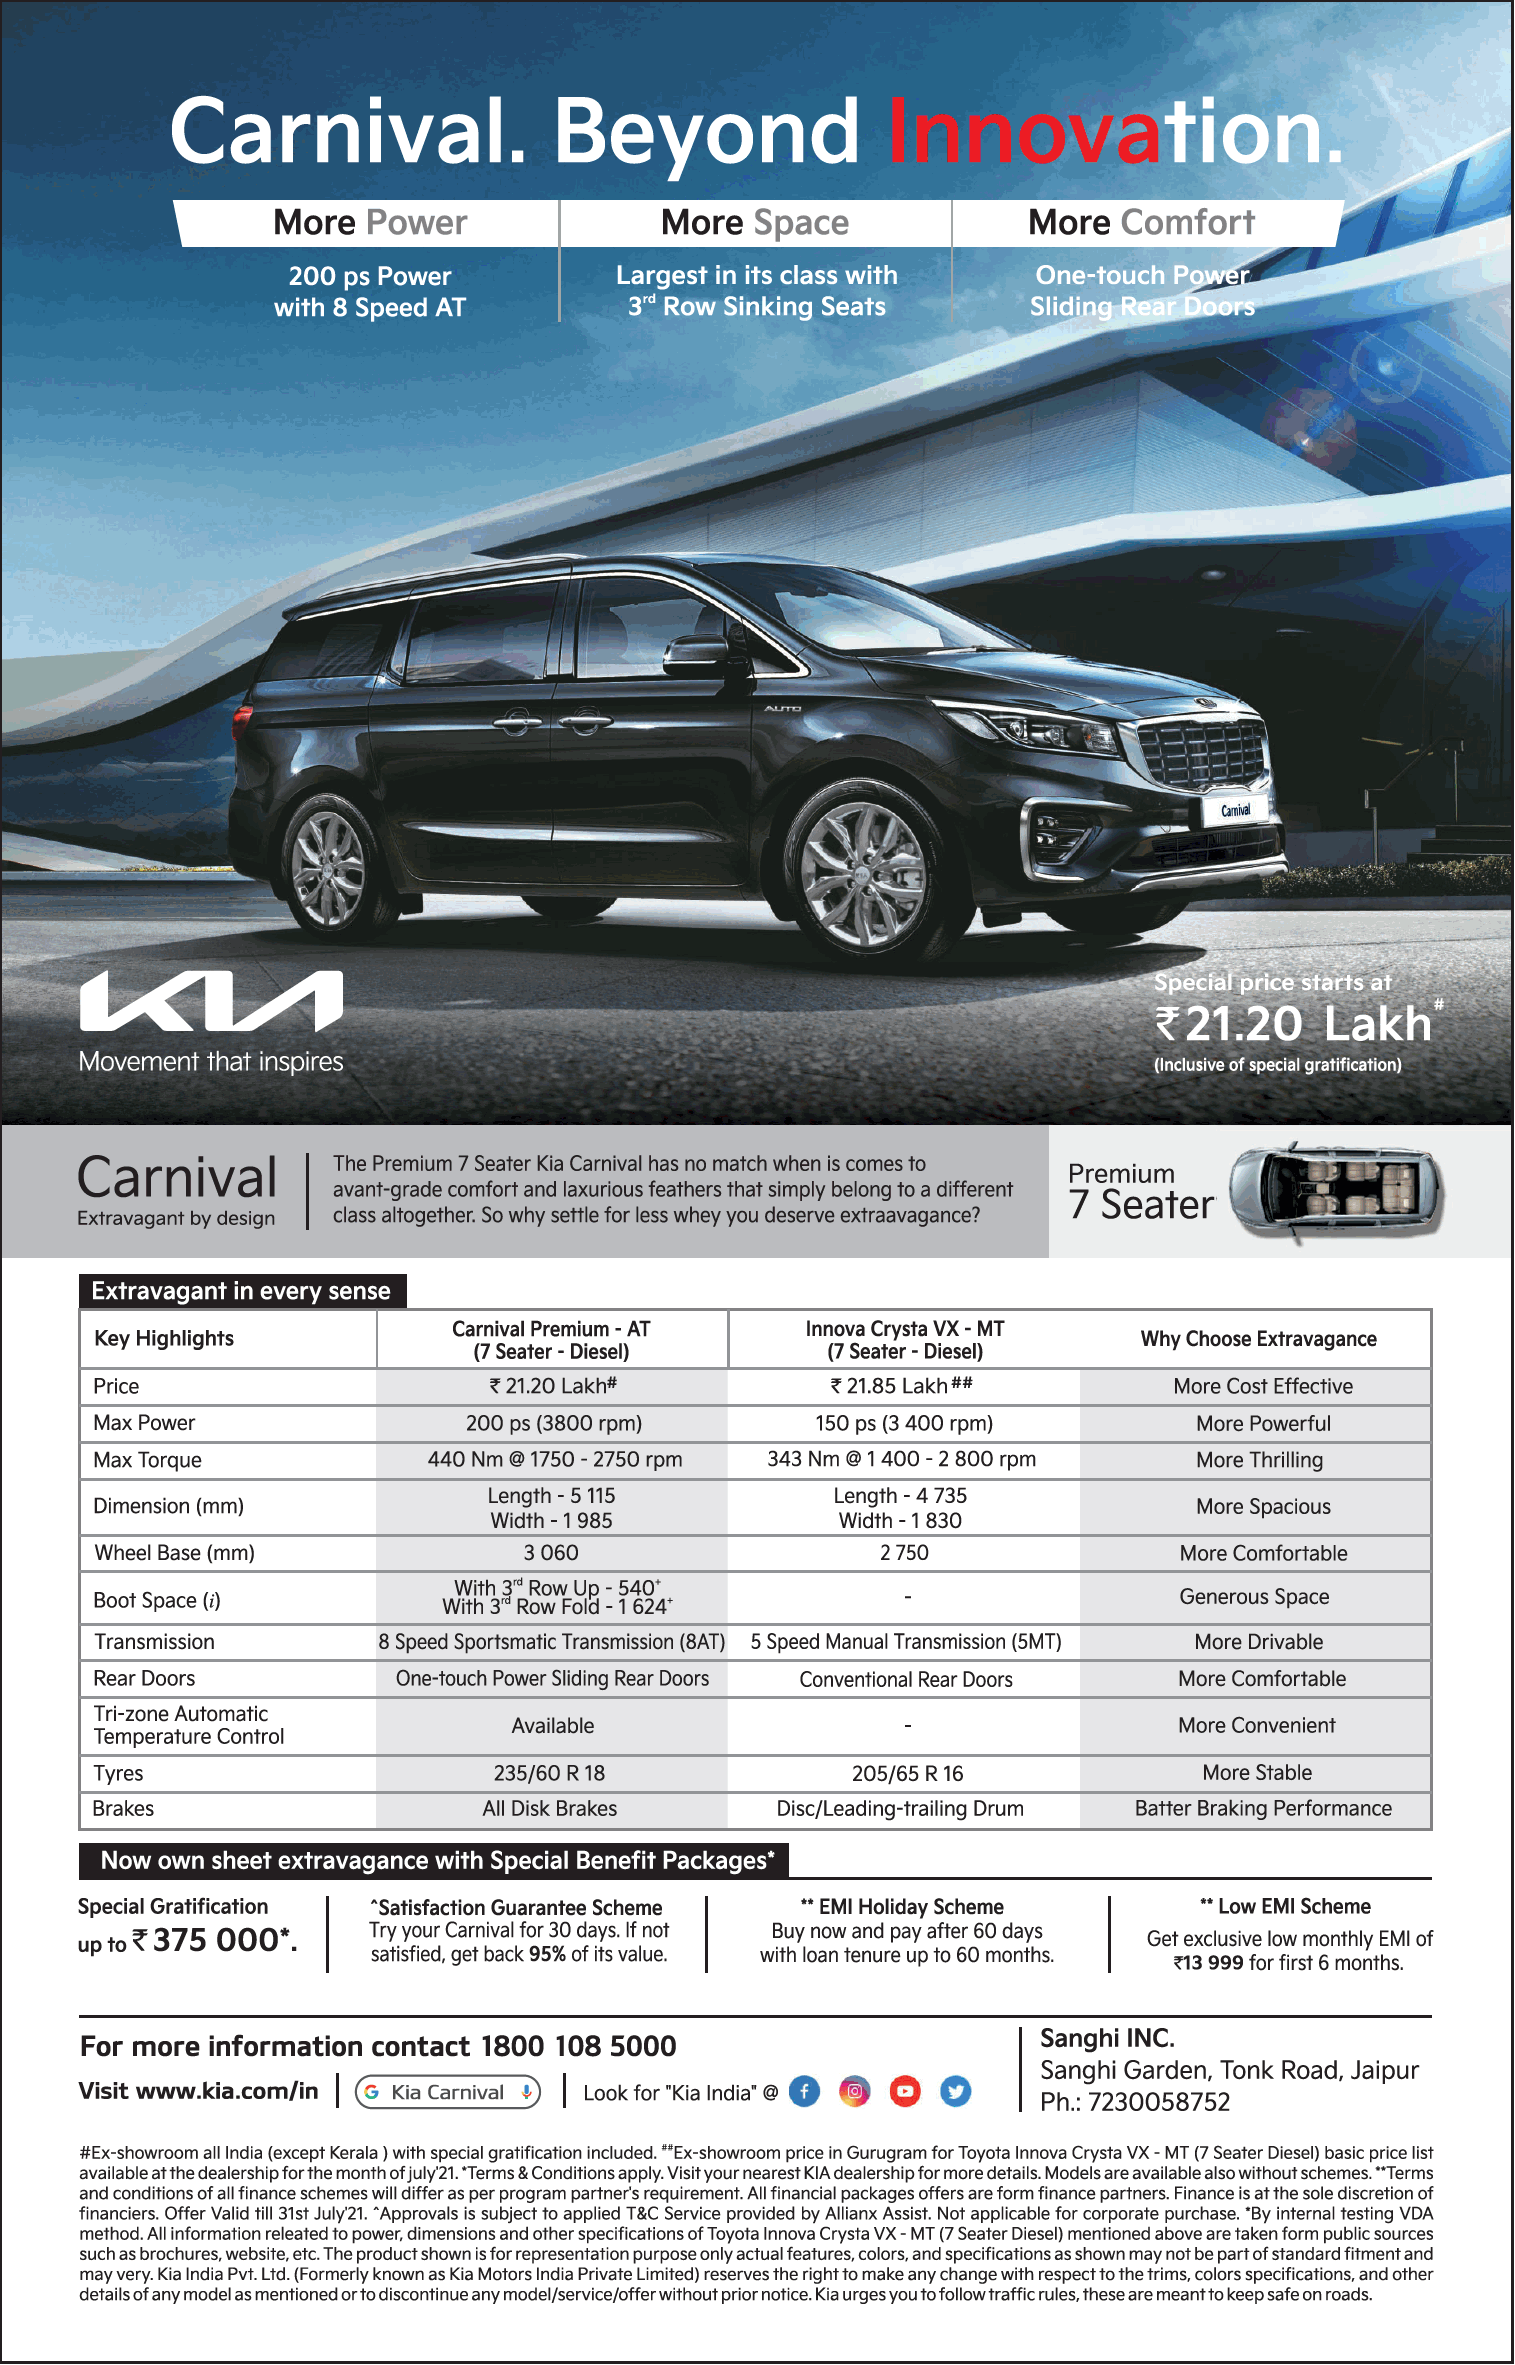 Kia Carnival Premium 7 Seater Special Price Starts At Rs 21.20 Lakh Ad